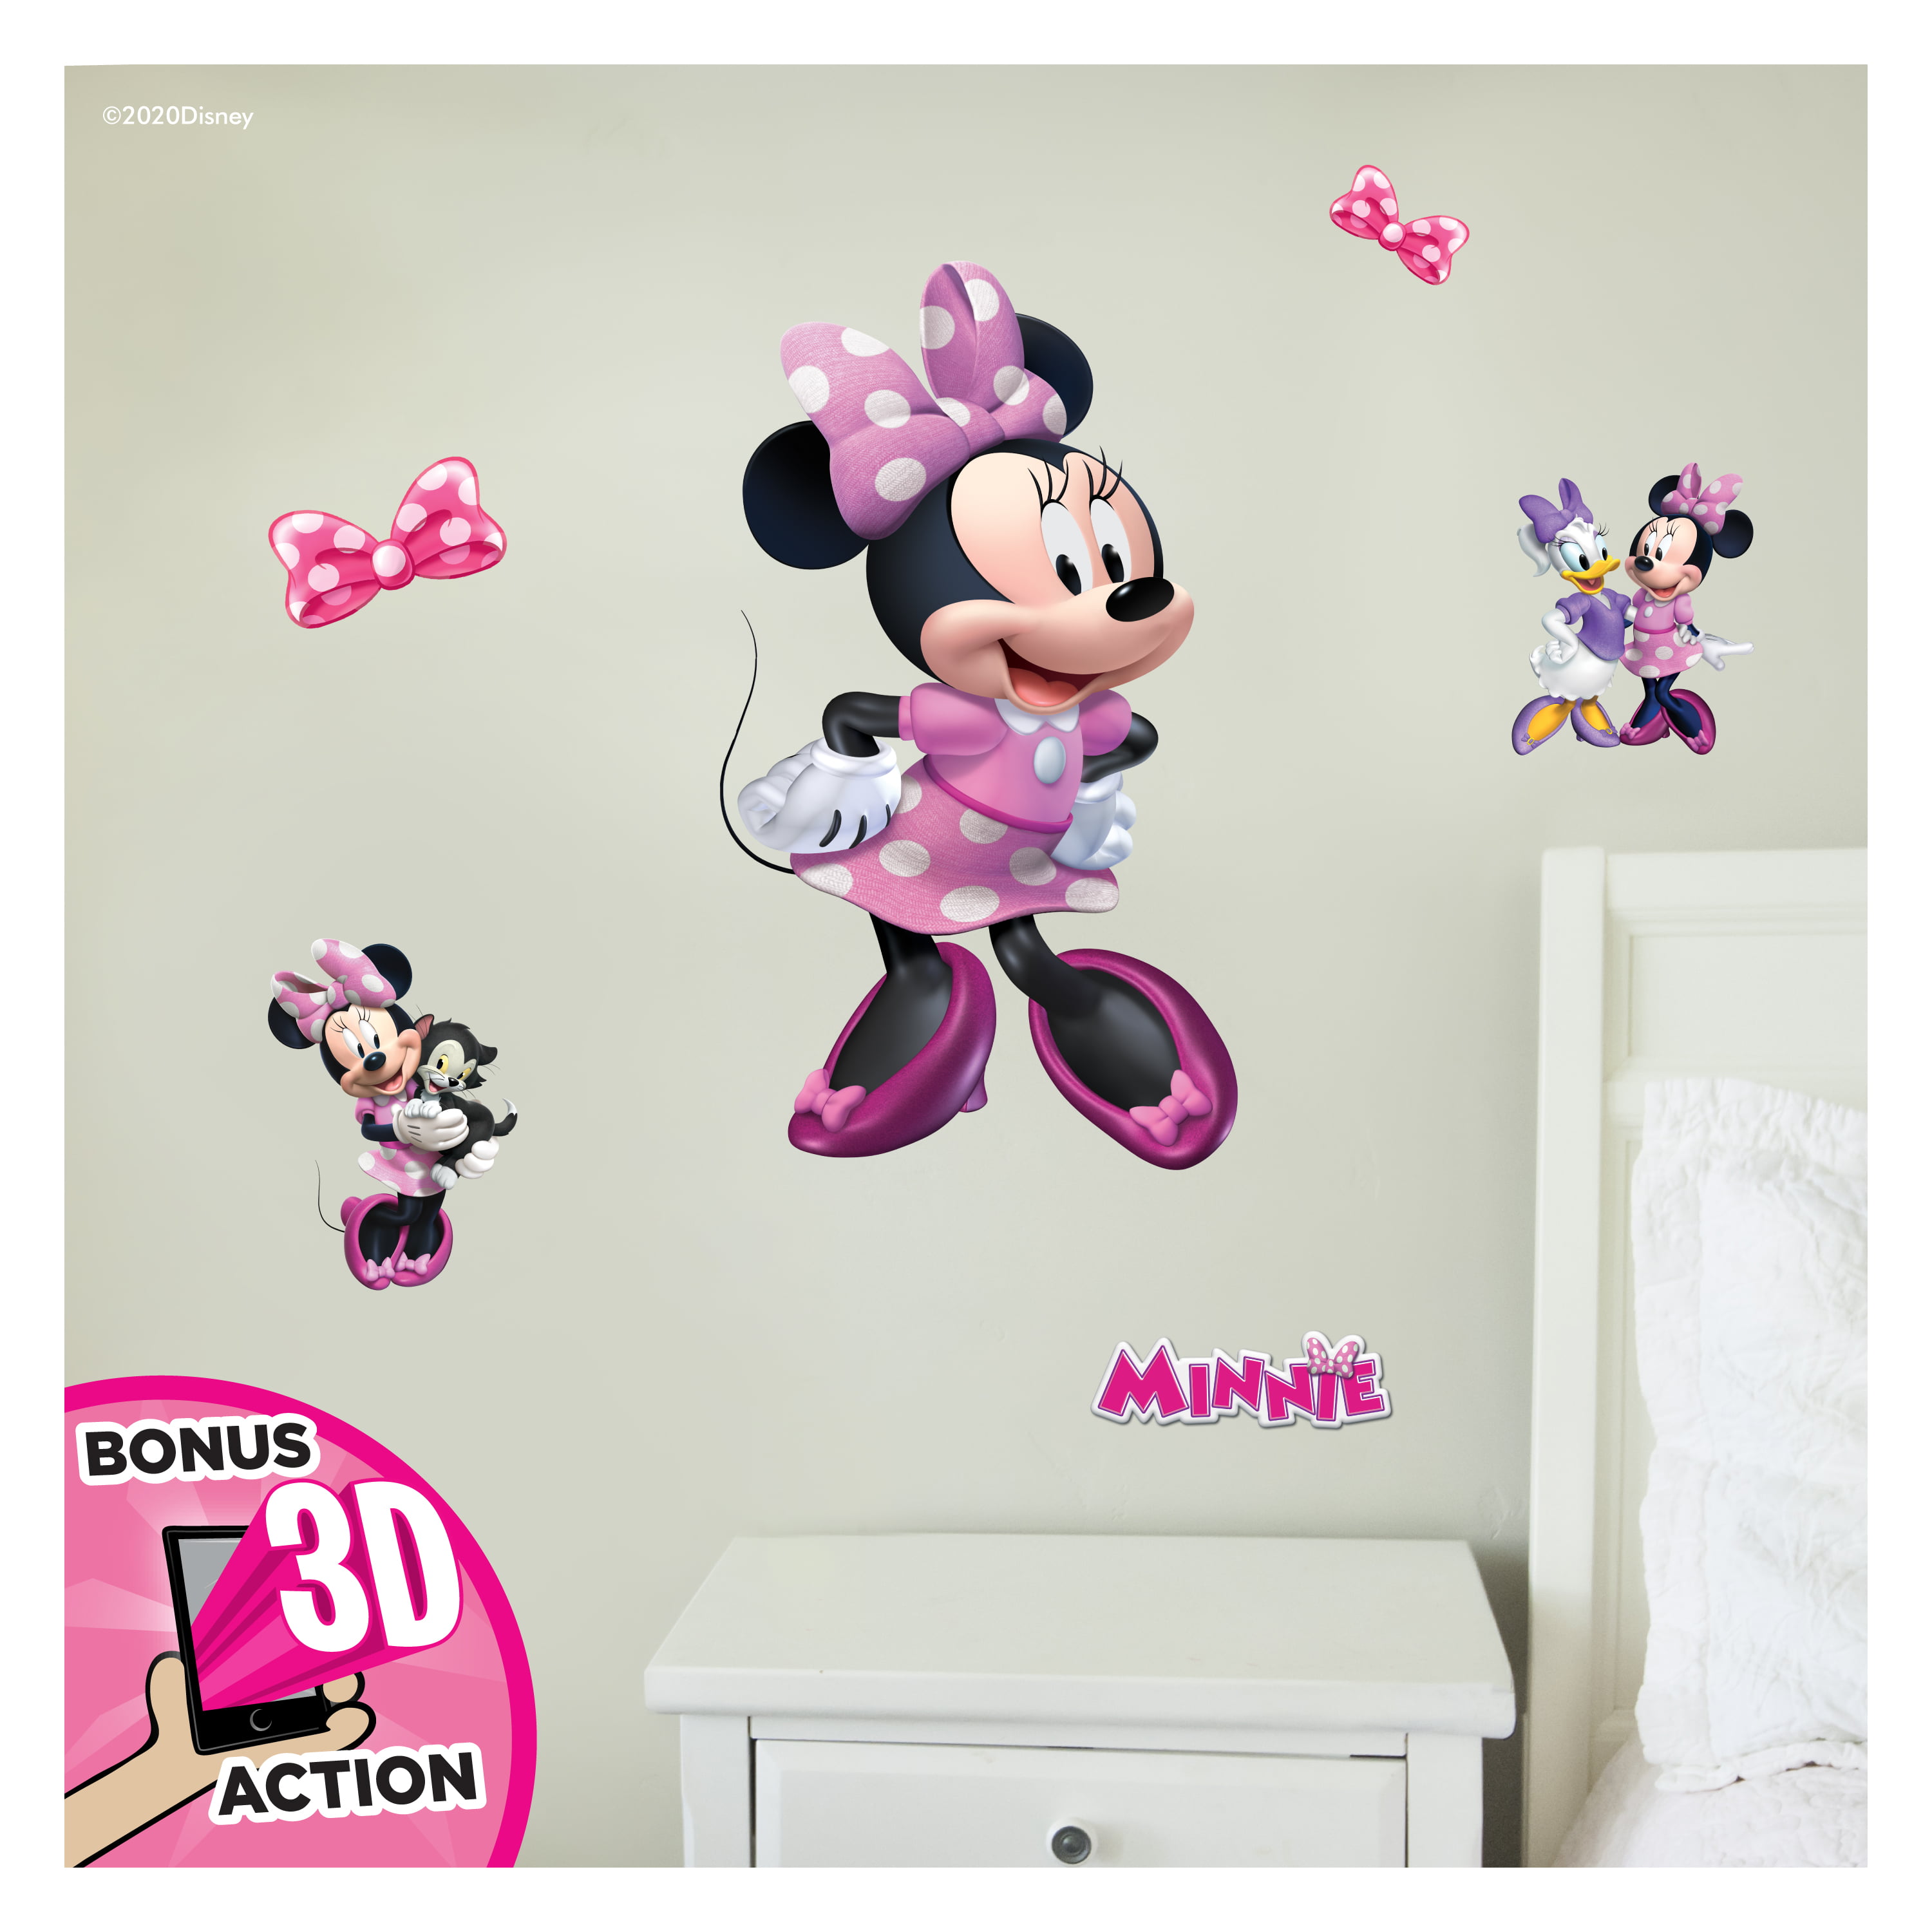 Minnie Mouse Disney Decal Removable Graphic Wall Sticker Mickey Clubhouse H140 